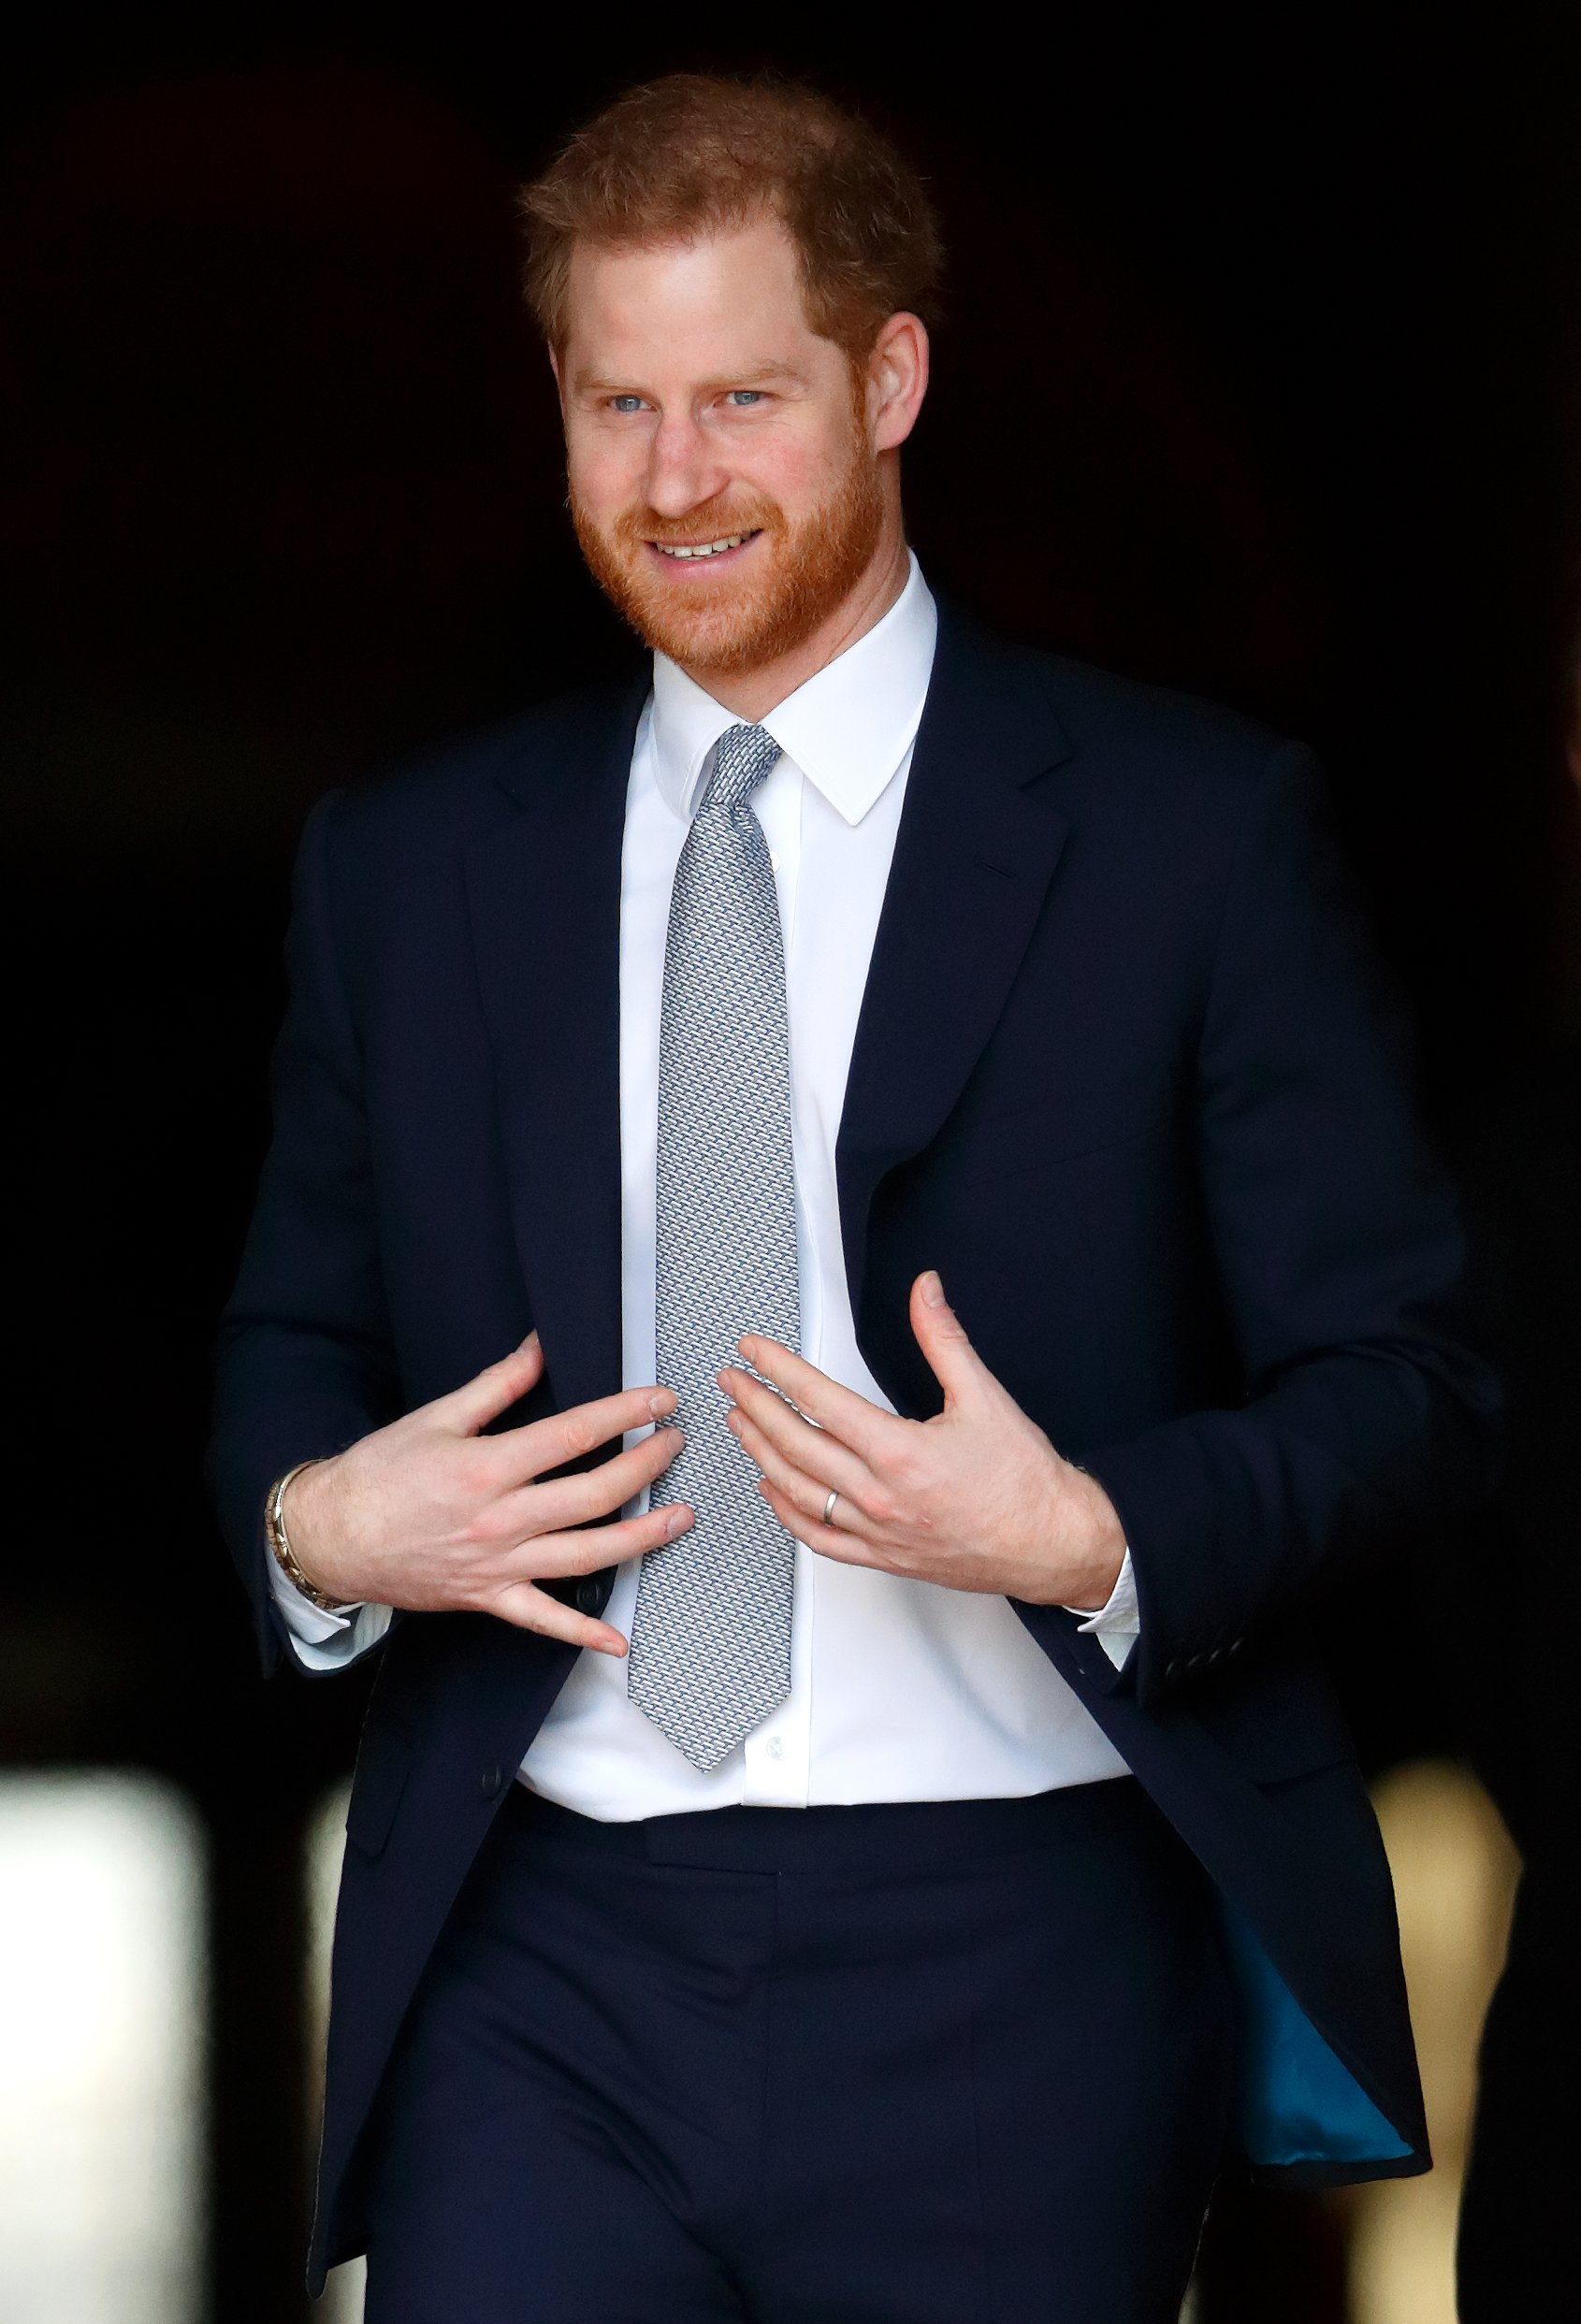 Prince Harry hosts the Rugby League World Cup 2021 draws for the men's, women's and wheelchair tournaments on January 16, 2020, in London, England. | Source: Getty Images.